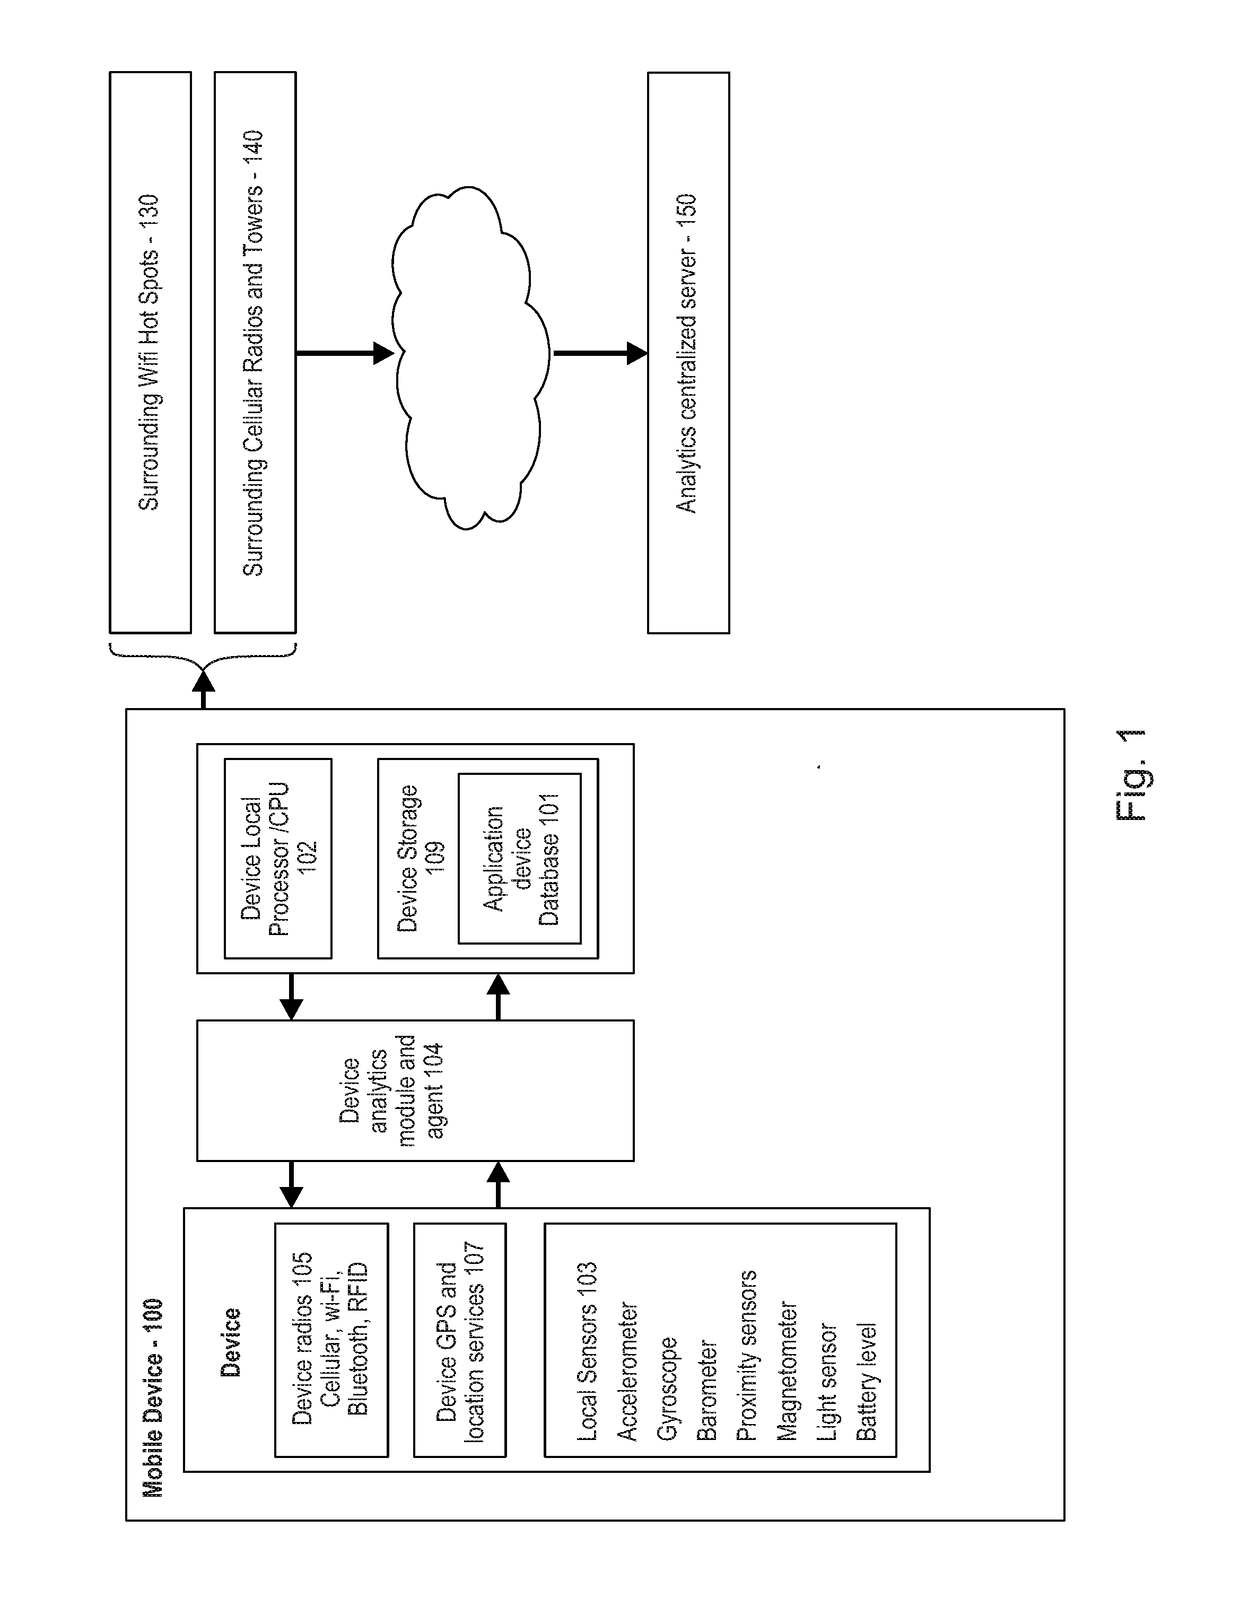 Methods and systems for collecting driving information and classifying drivers and self-driving systems